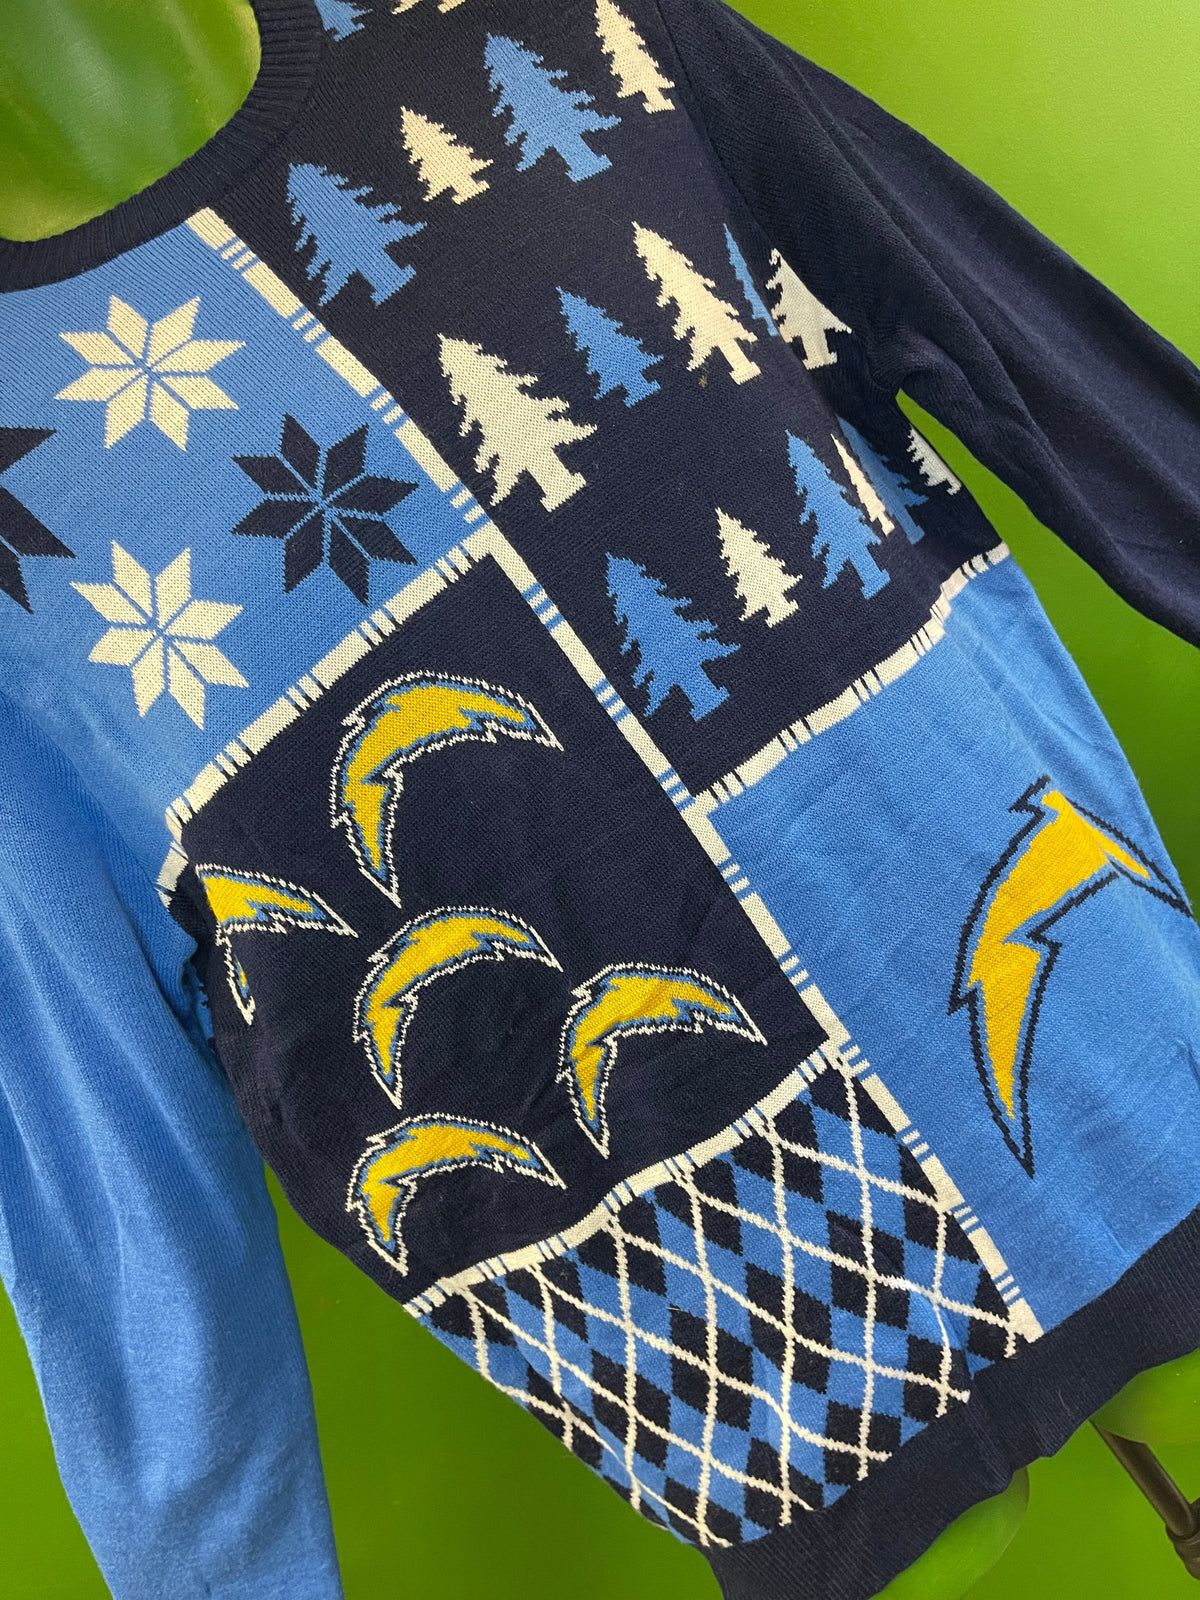 NFL Los Angeles Chargers FOCO "Ugly" Christmas/Winter Jumper Men's Large